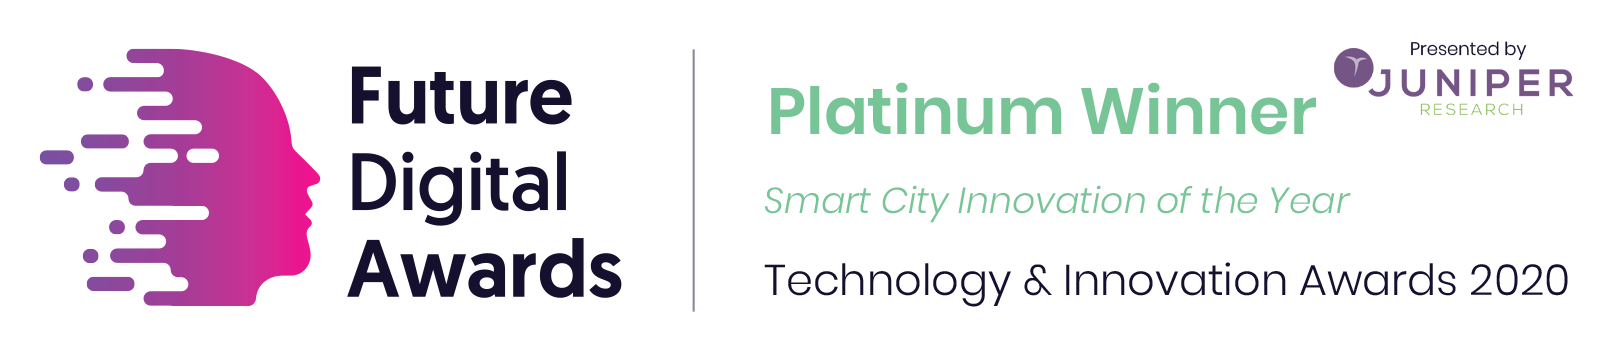 Smart City innovation of the year